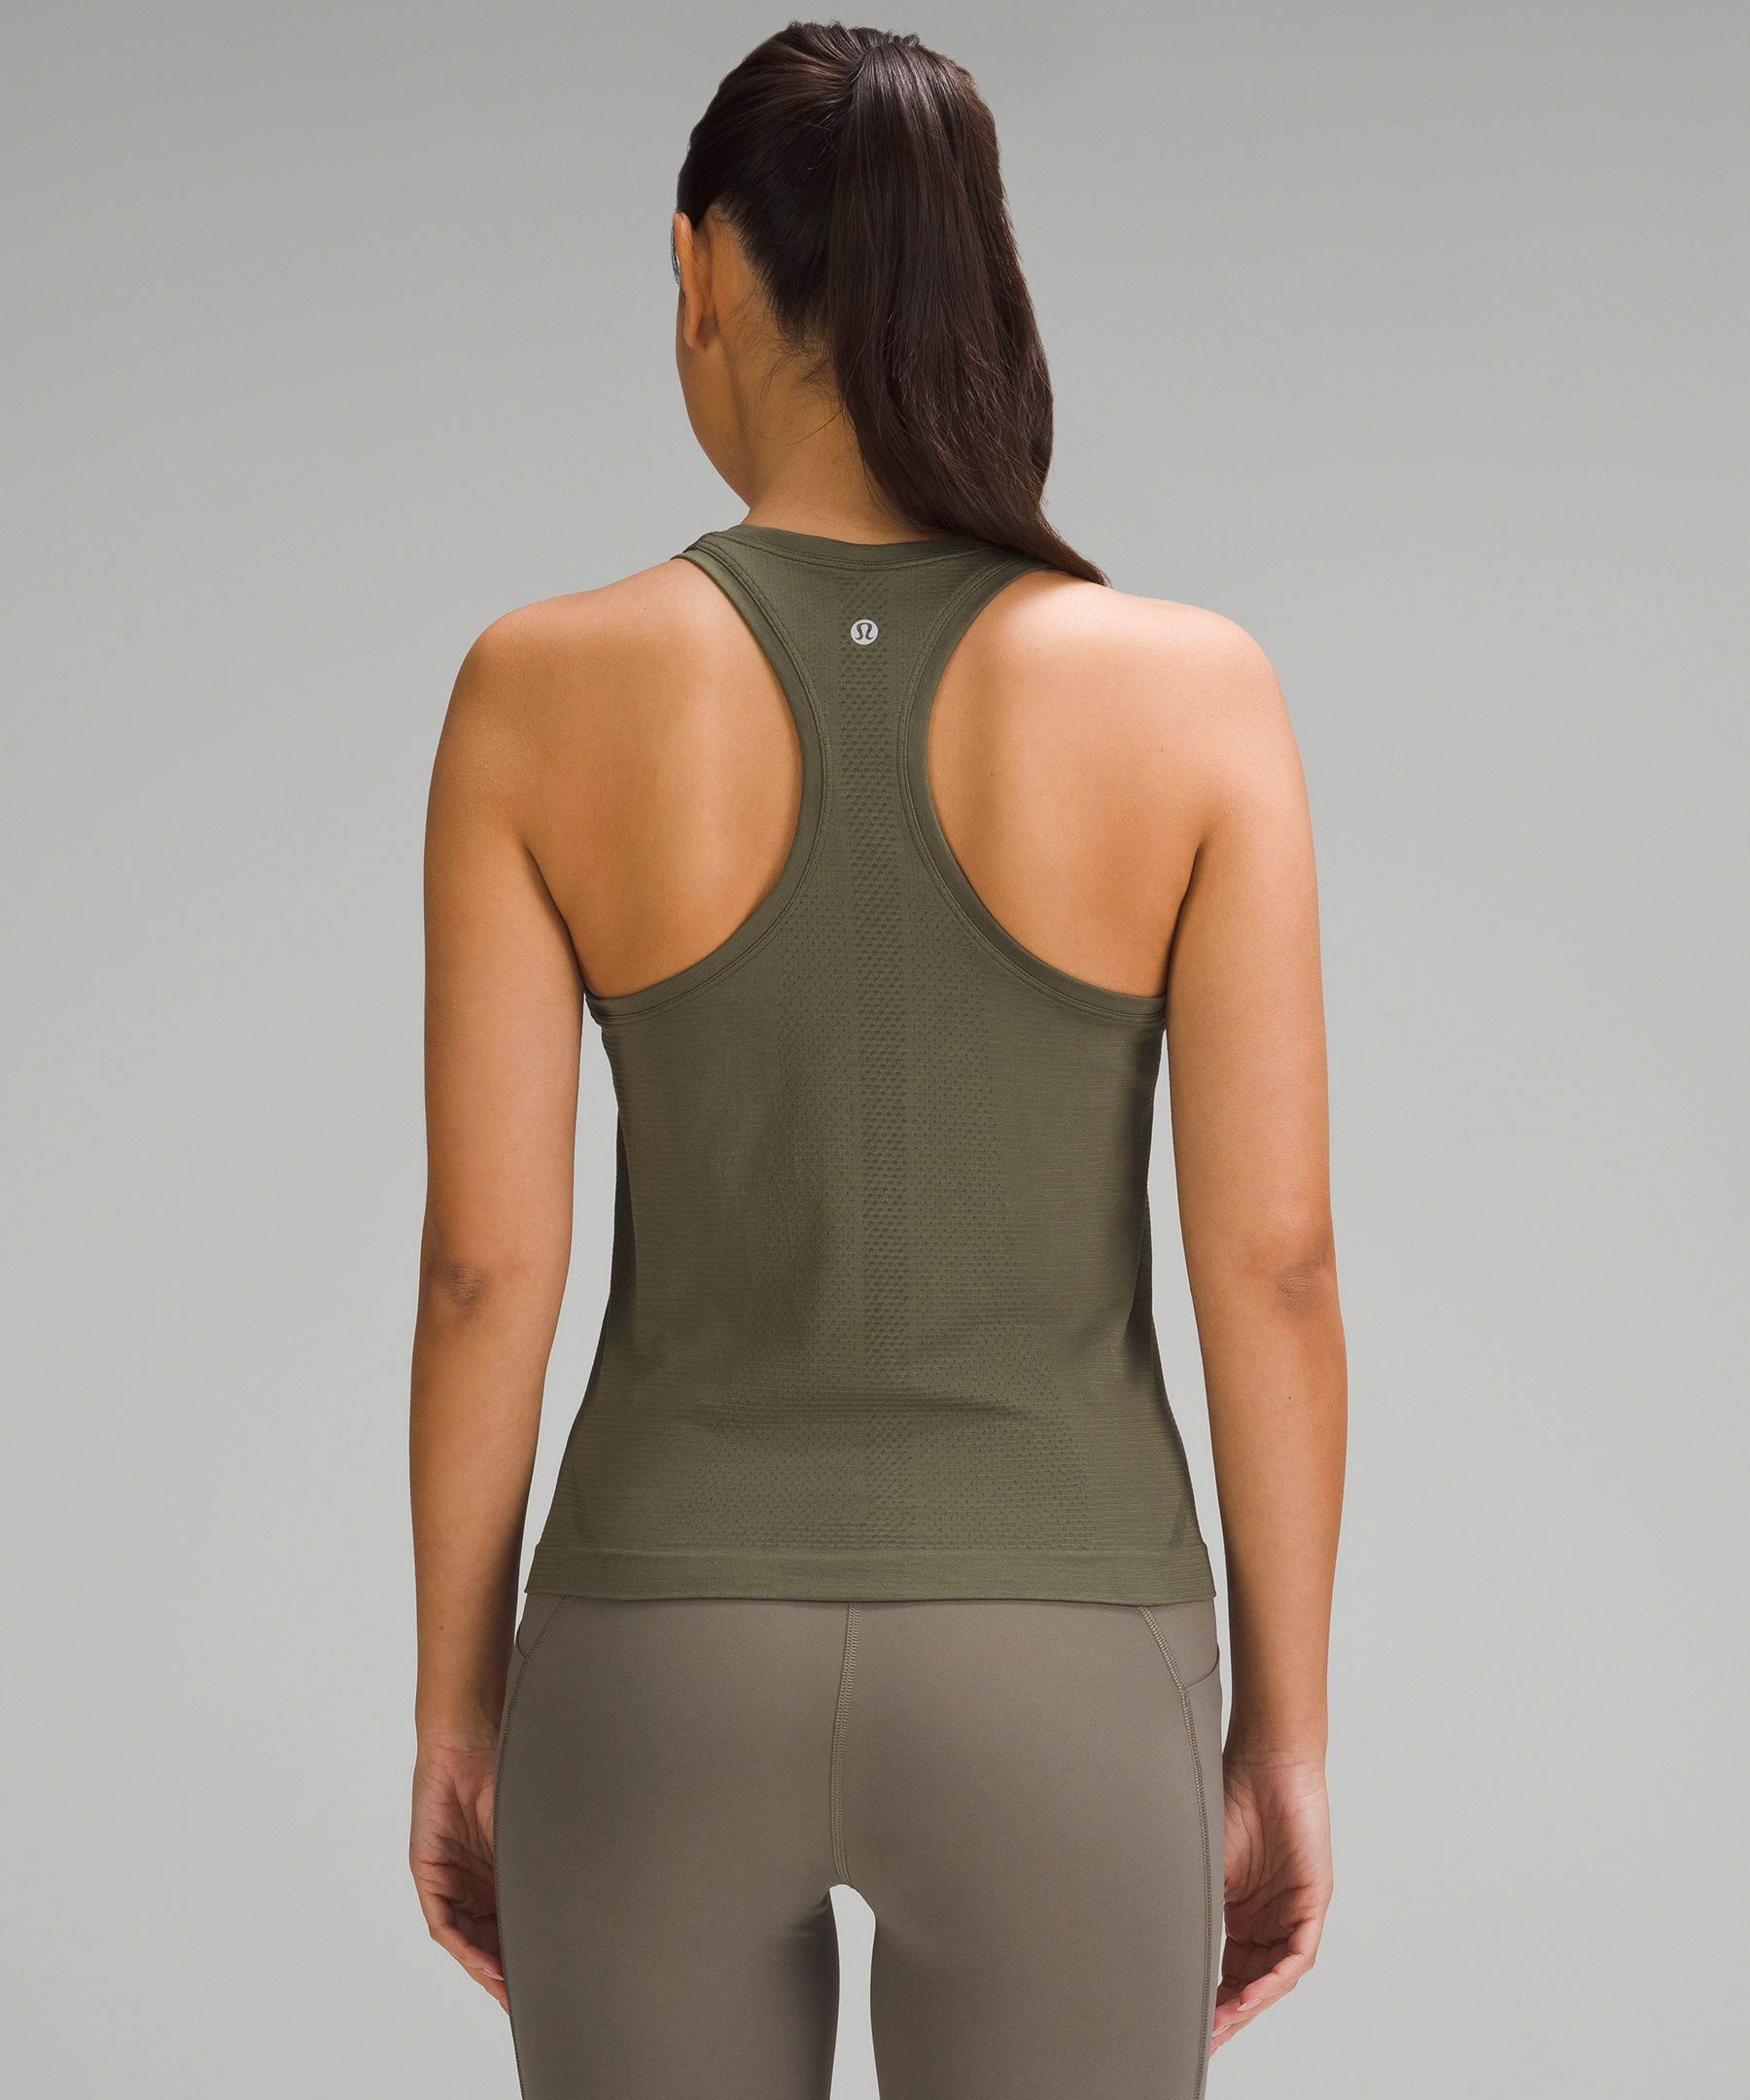 NWT* Lululemon Swiftly Tech RB Tank 2.0 *Race Color Icing Blue Size 20